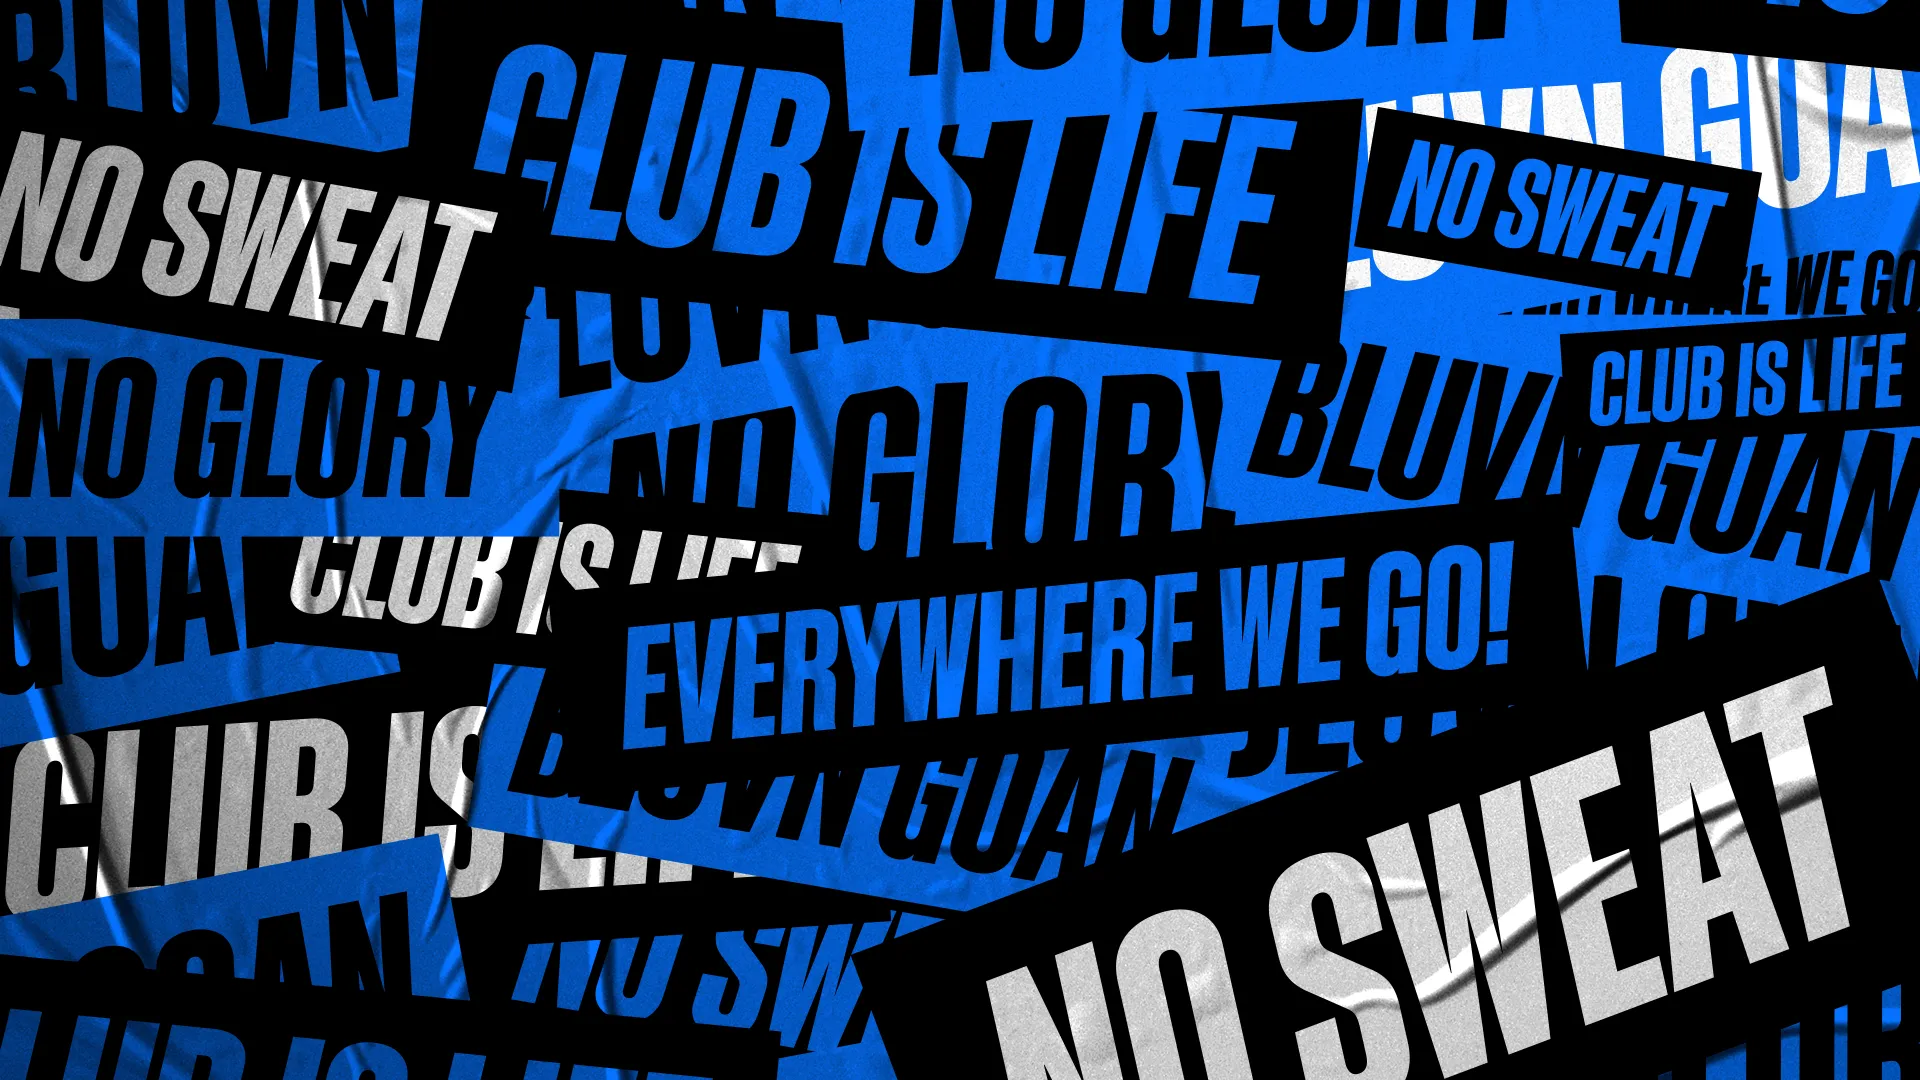 <strong>Club is</strong> Life